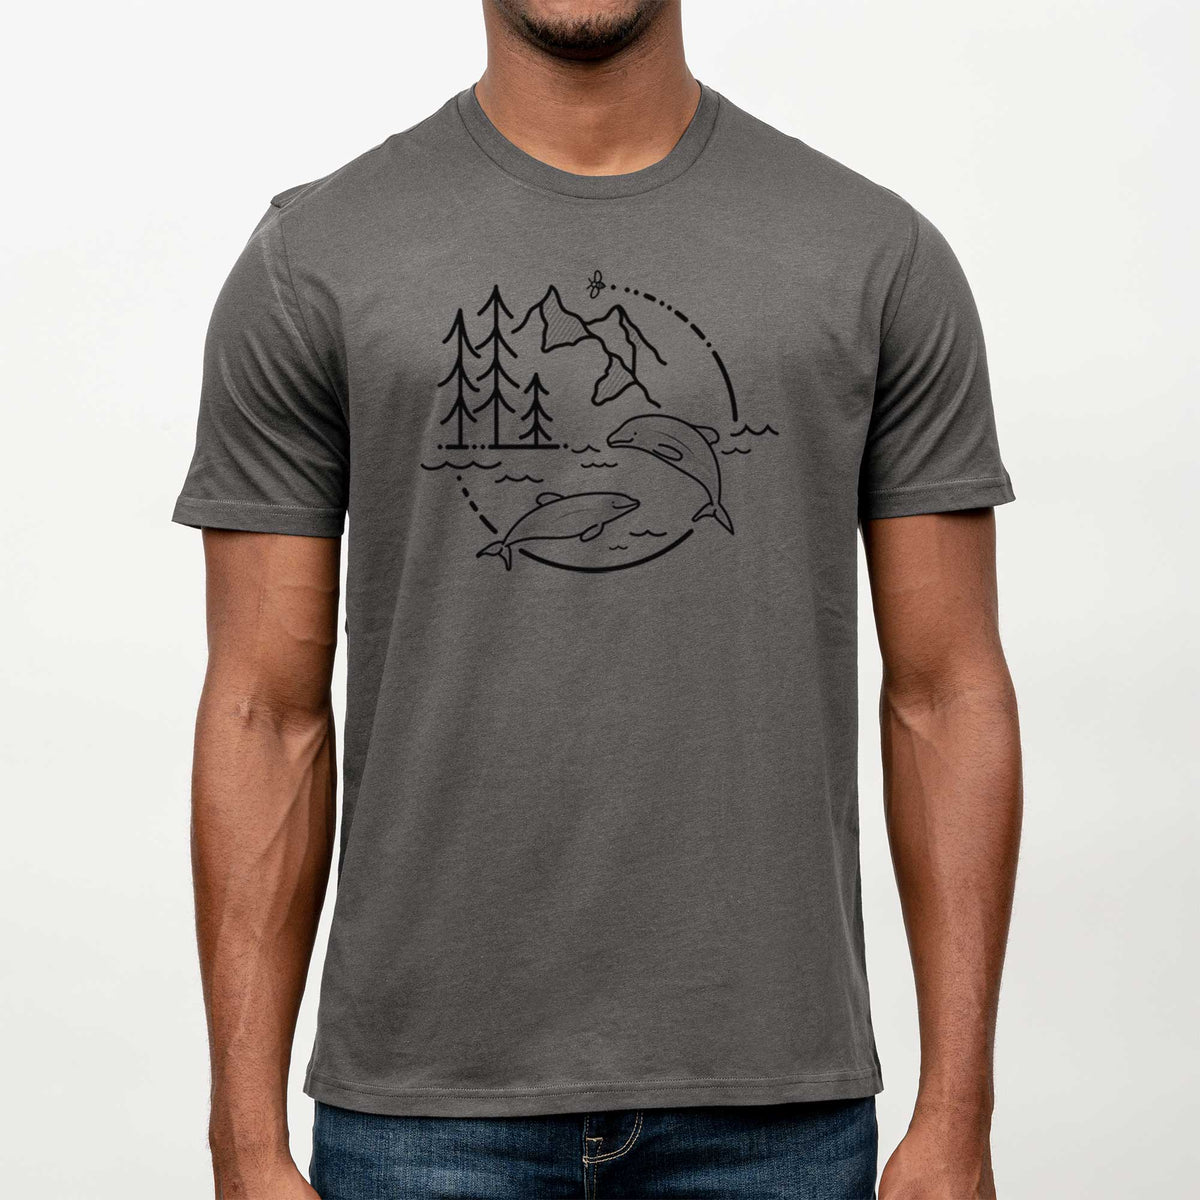 It&#39;s All Connected - Maui Dolphins -  Mineral Wash 100% Organic Cotton Short Sleeve